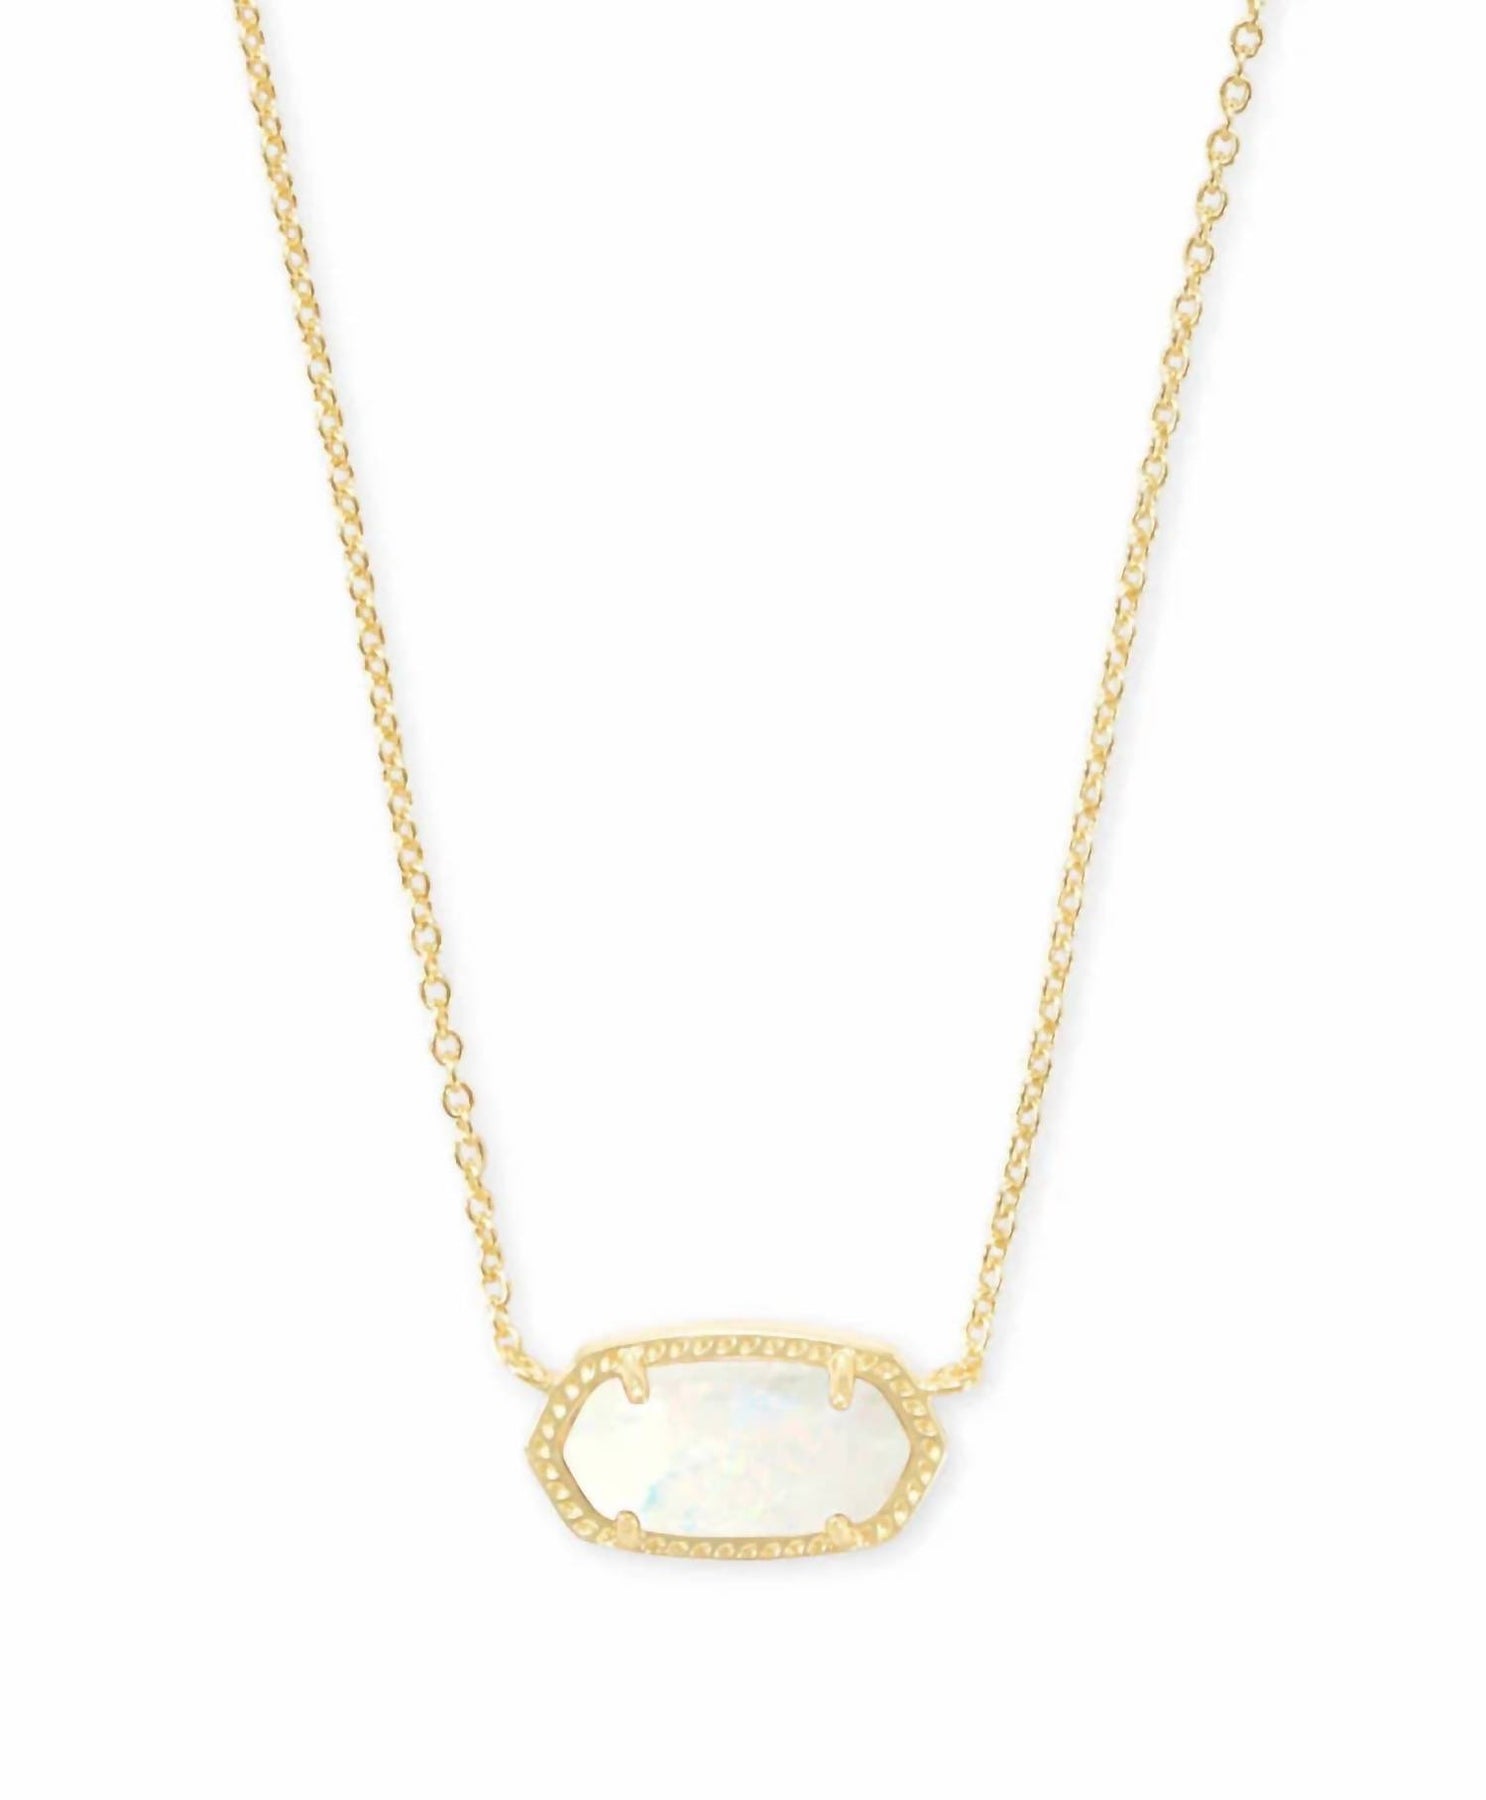 Elisa Gold Louisiana Necklace in Ivory Mother-of-Pearl